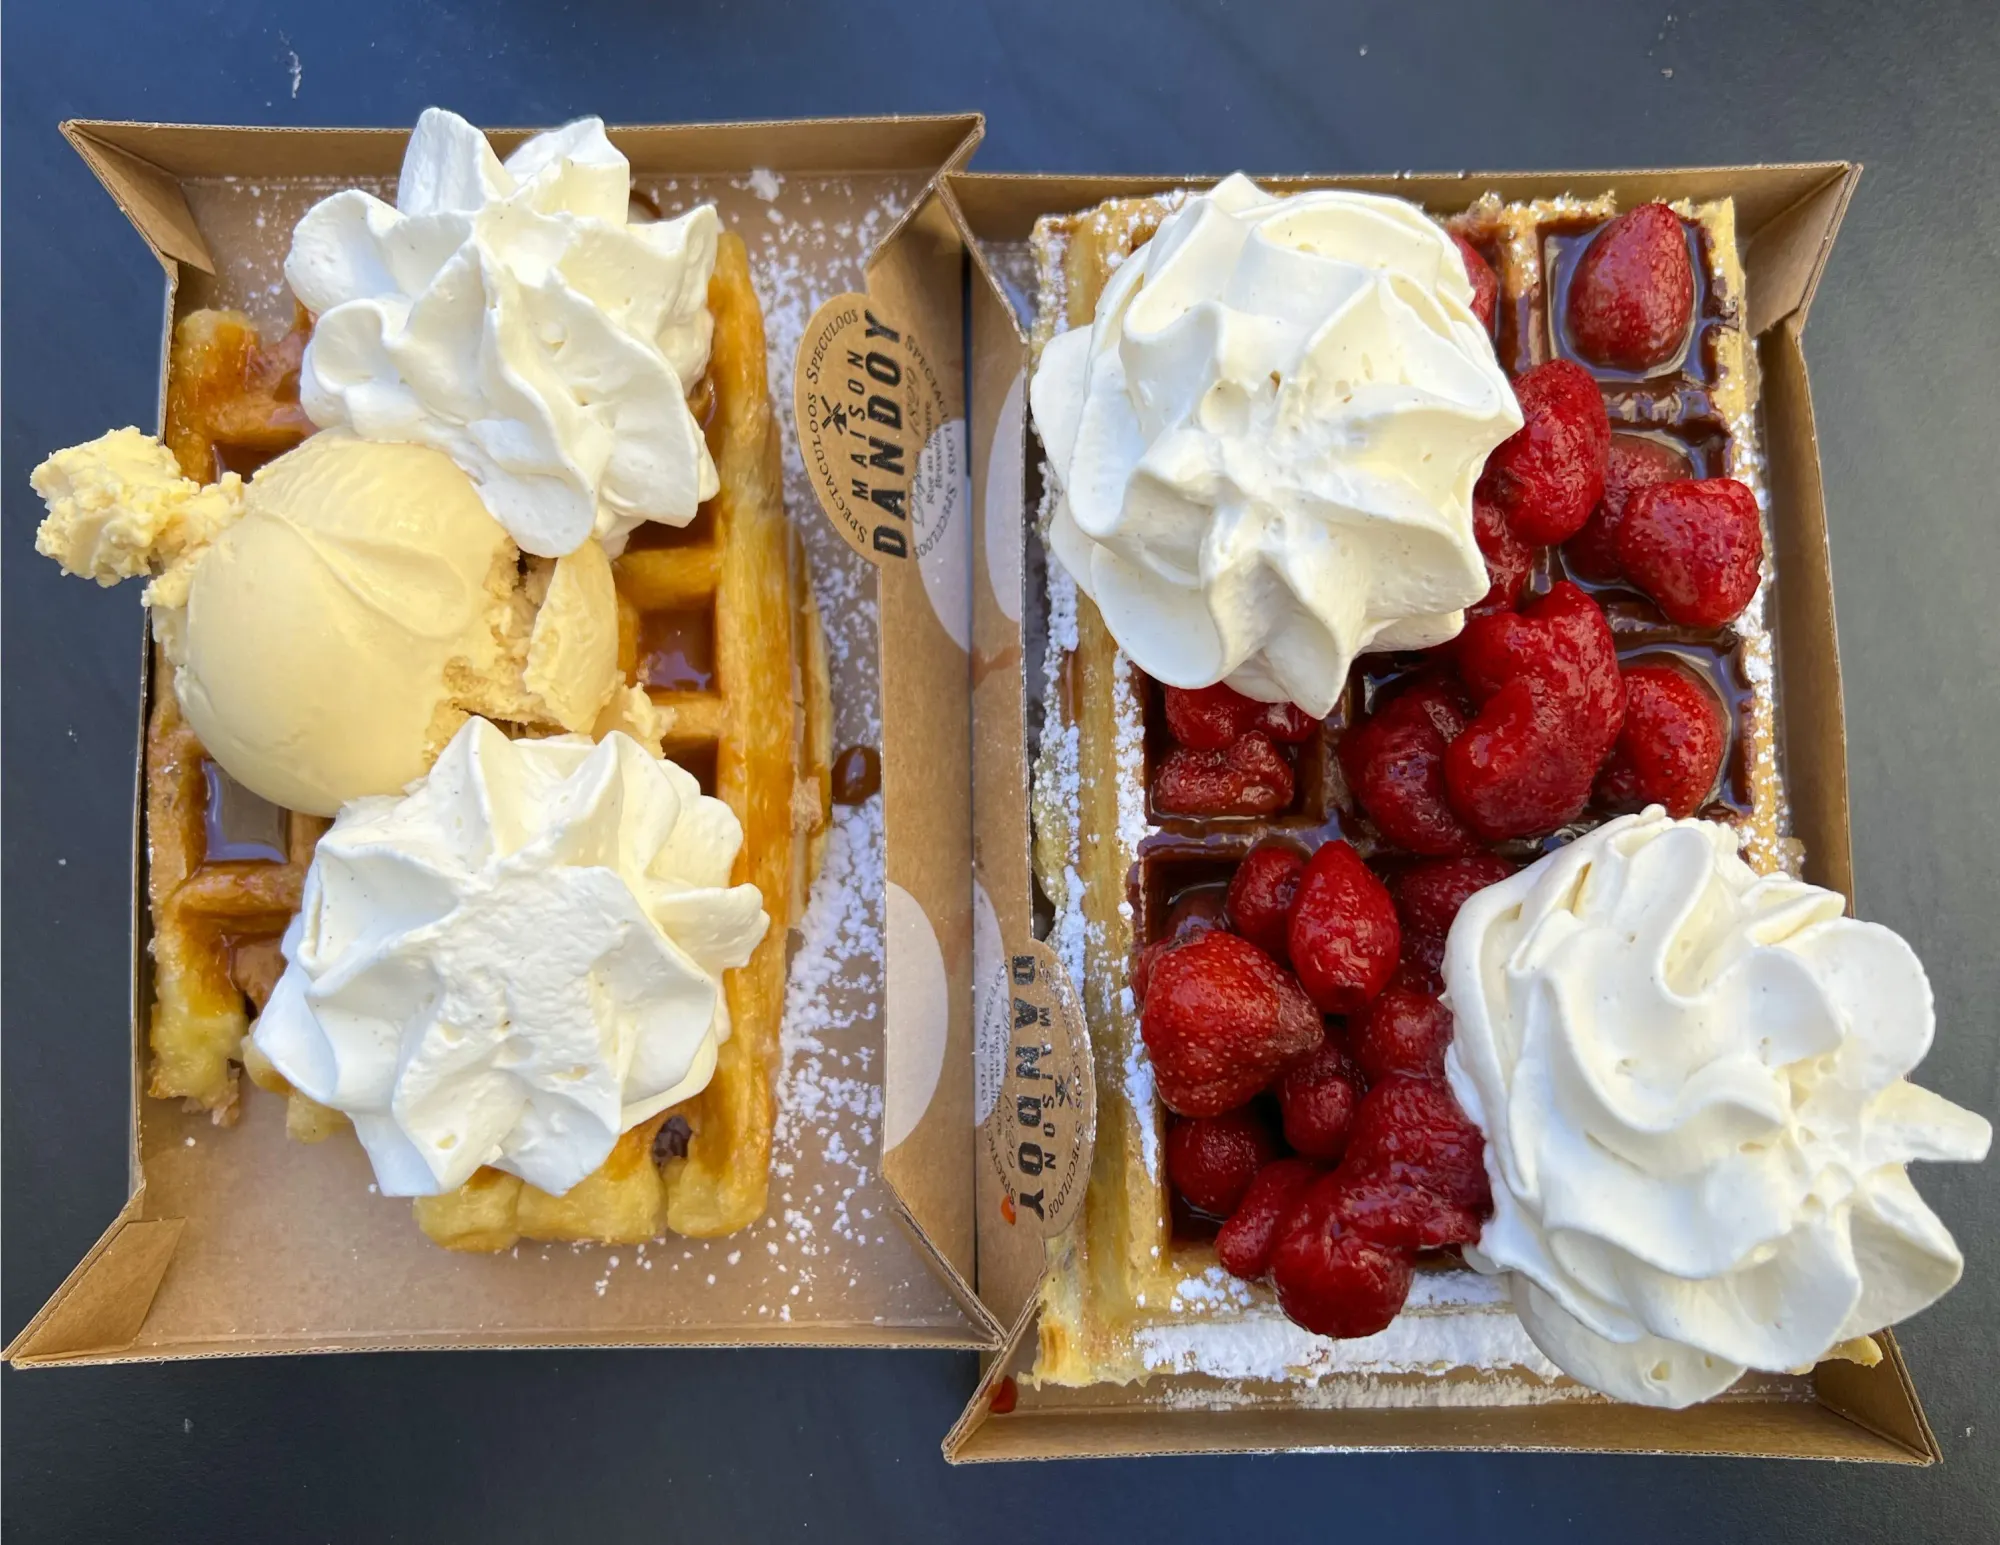 Two waffles one with ice cream the other with berries, both covered in whipped cream